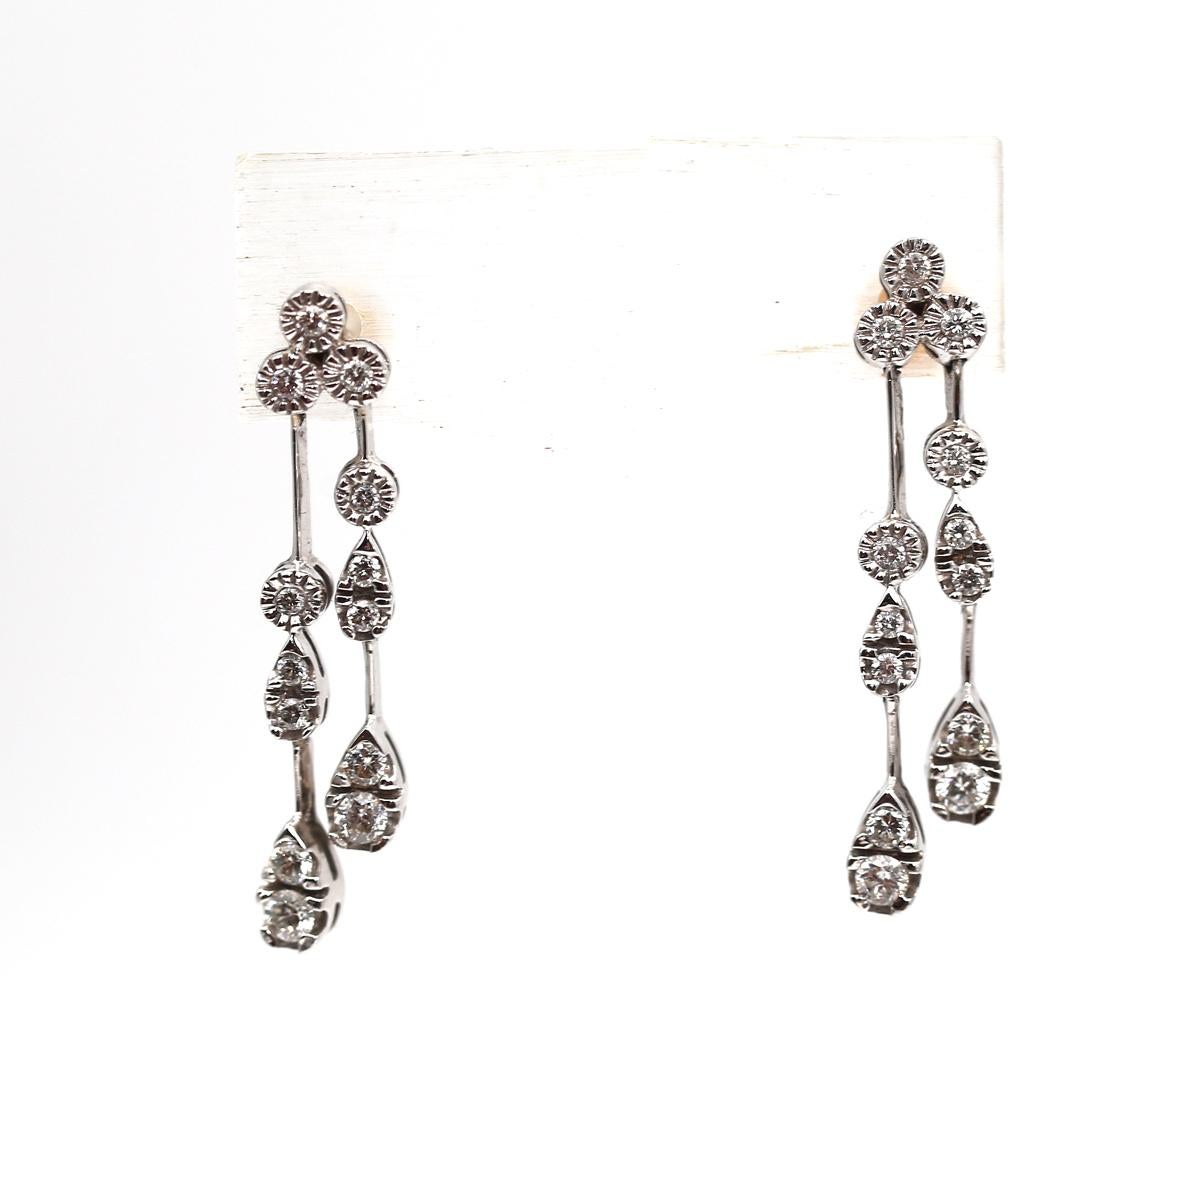 Diamond Drop Earrings 18K White Gold, created around 2000.
A Pair Of Diamond Drop Earrings in 18ct white gold, each set with a trio of round brilliant cut diamonds suspending two rows of further round brilliant cut diamonds. The links are not fixed